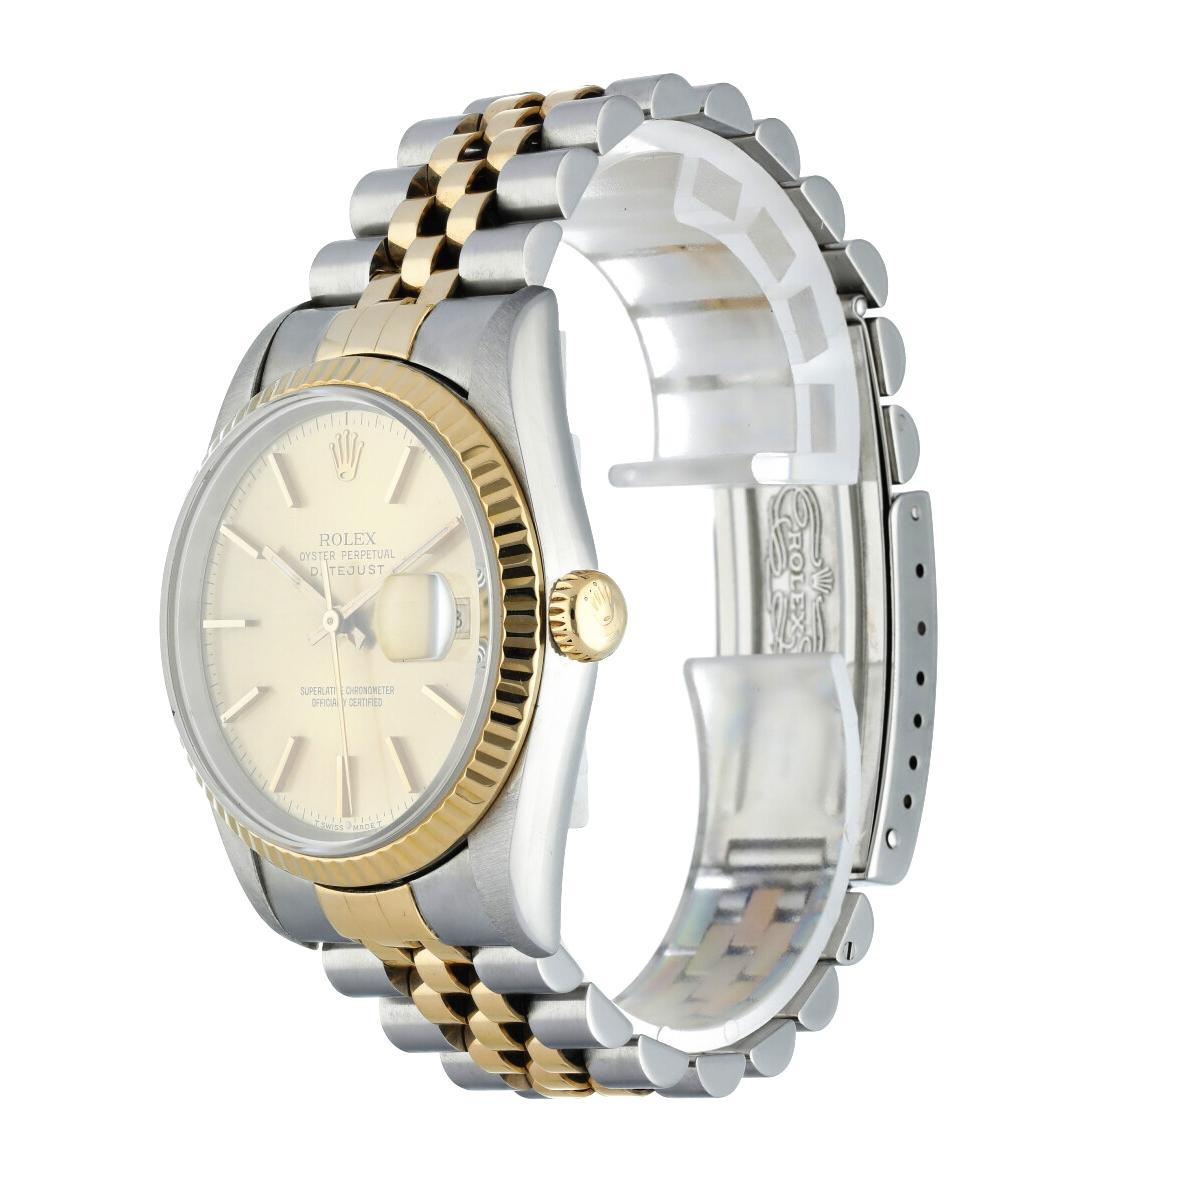 Rolex Datejust 16233 Mens Watch.
36mm Stainless Steel case. 
Yellow Gold fluted bezel. 
Champagne dial with Luminous gold hands and index hour markers. 
Minute markers on the outer dial. 
Date display at the 3 o'clock position. 
Stainless Steel